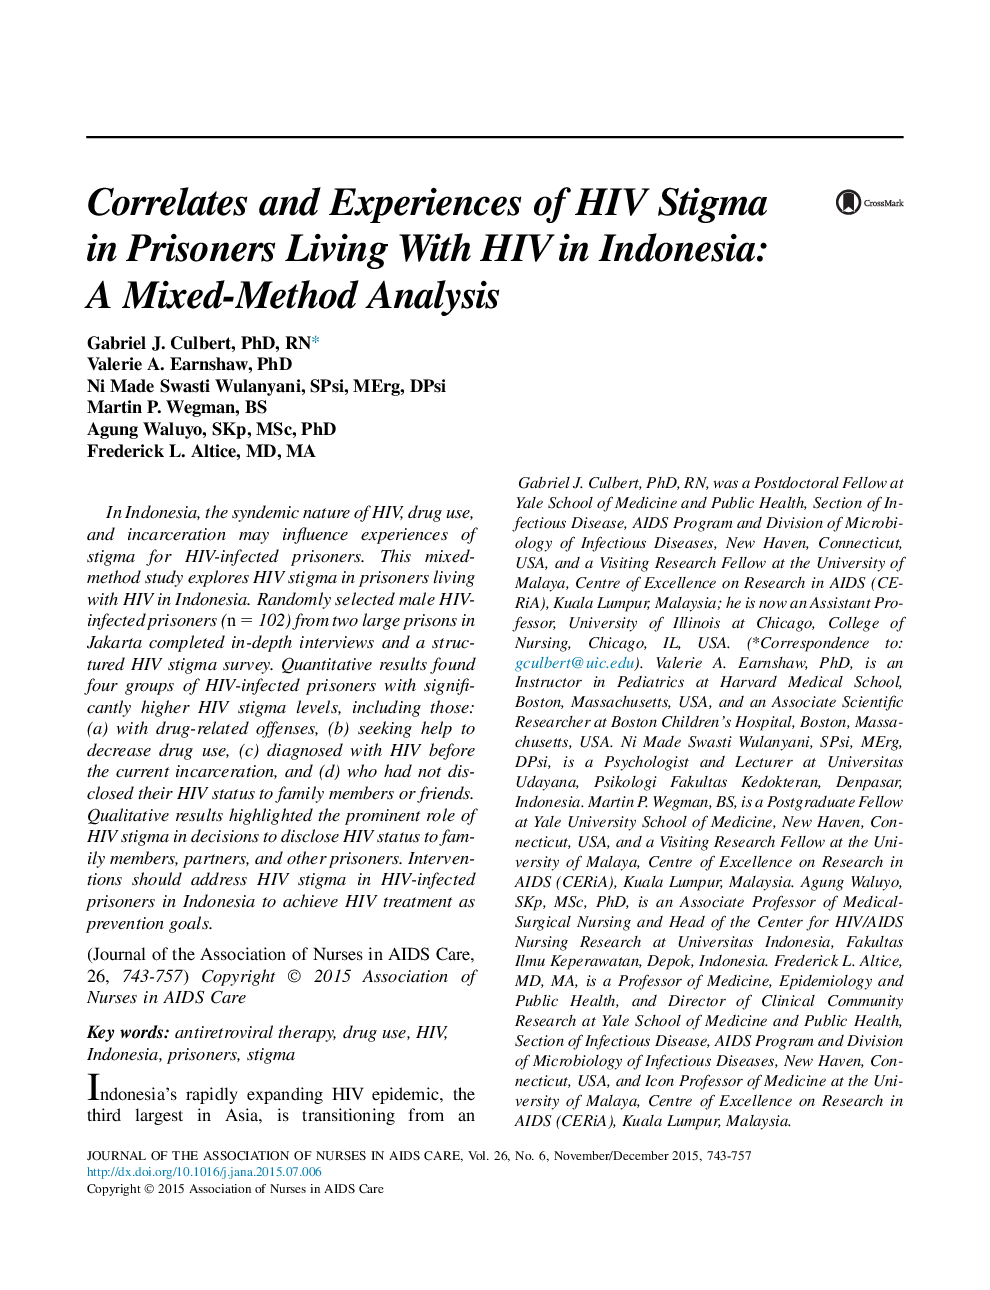 FeatureCorrelates and Experiences of HIV Stigma in Prisoners Living With HIV in Indonesia: A Mixed-Method Analysis